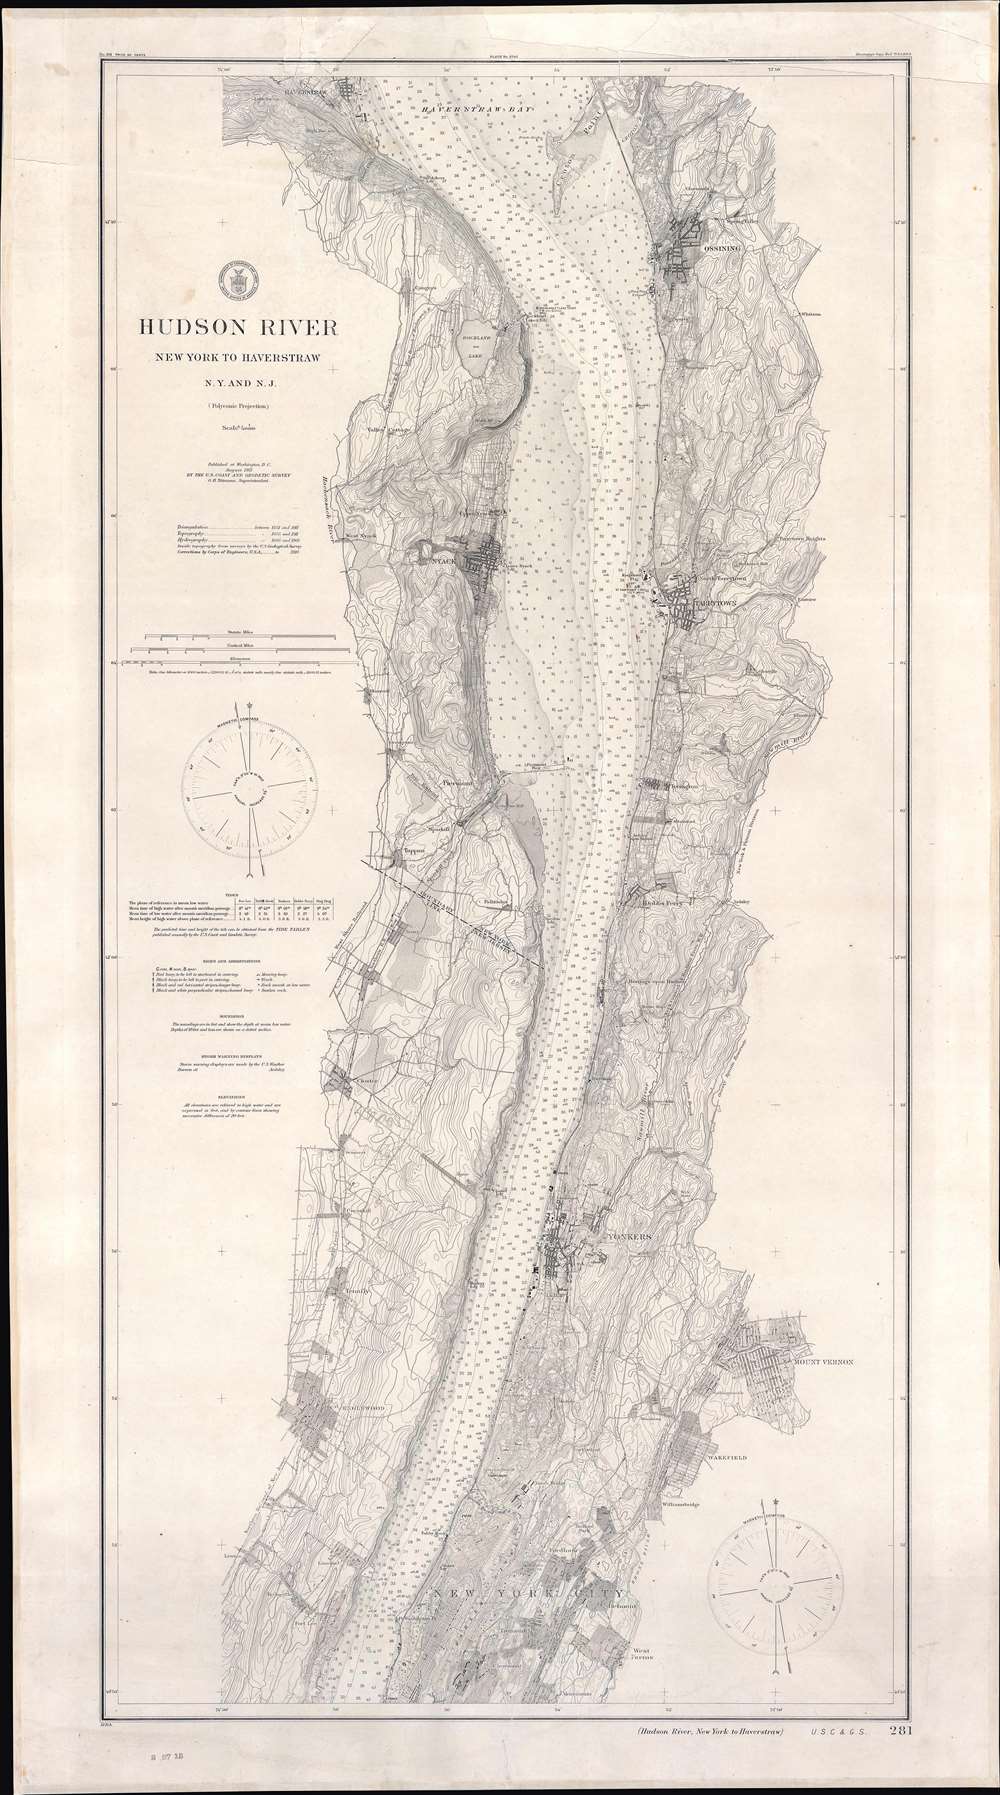 Hudson River New York to Haverstraw N.Y. and N.J. - Main View